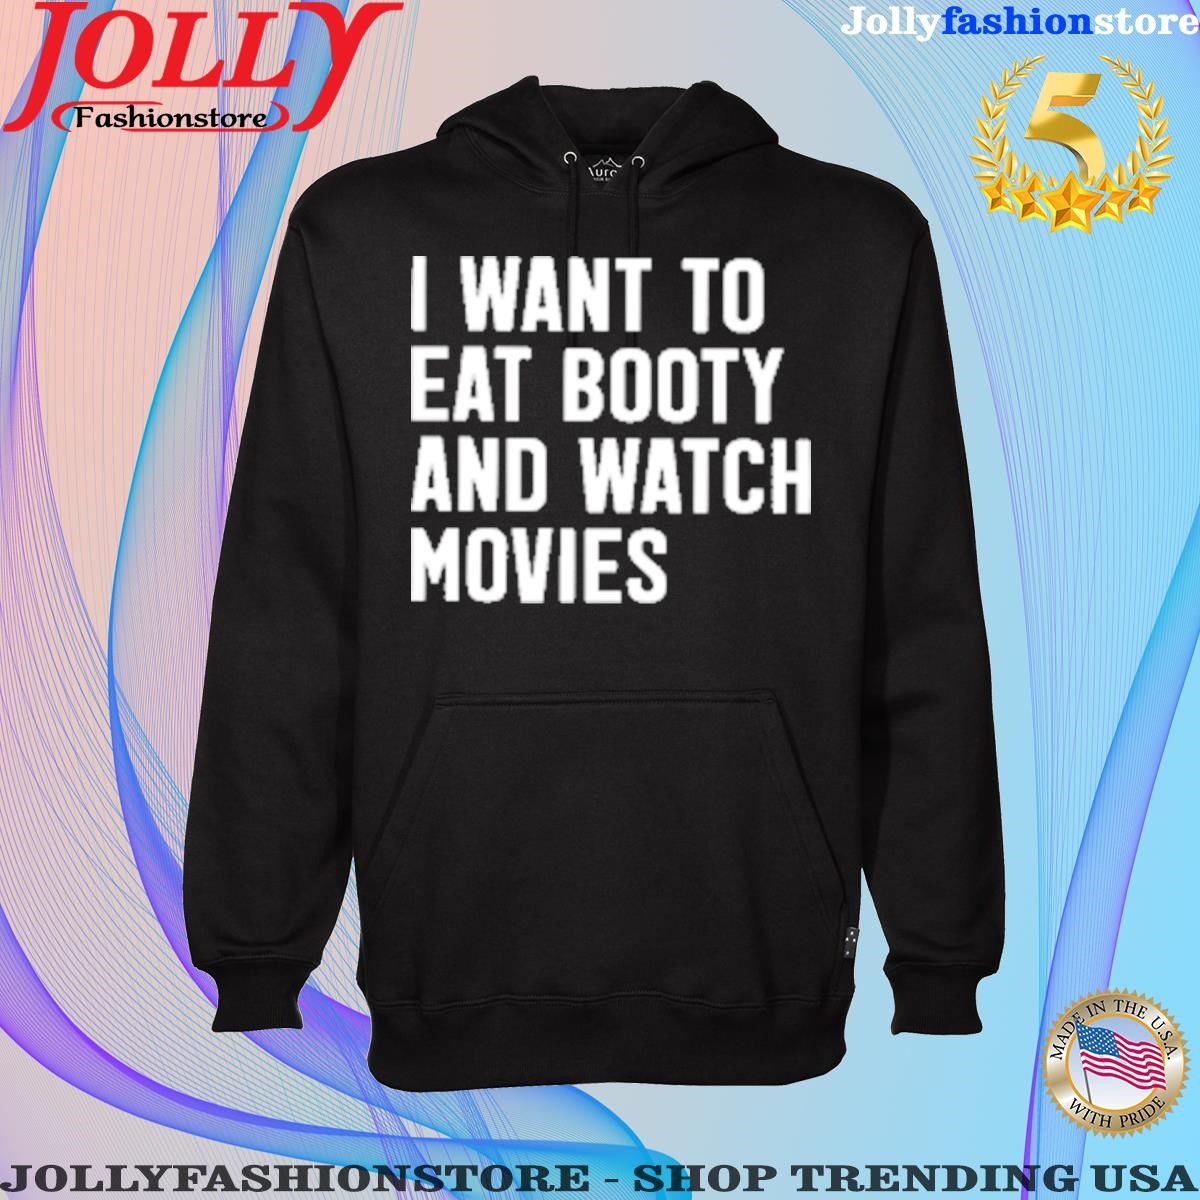 I want to eat booty and watch movies Hoodie shirt.png